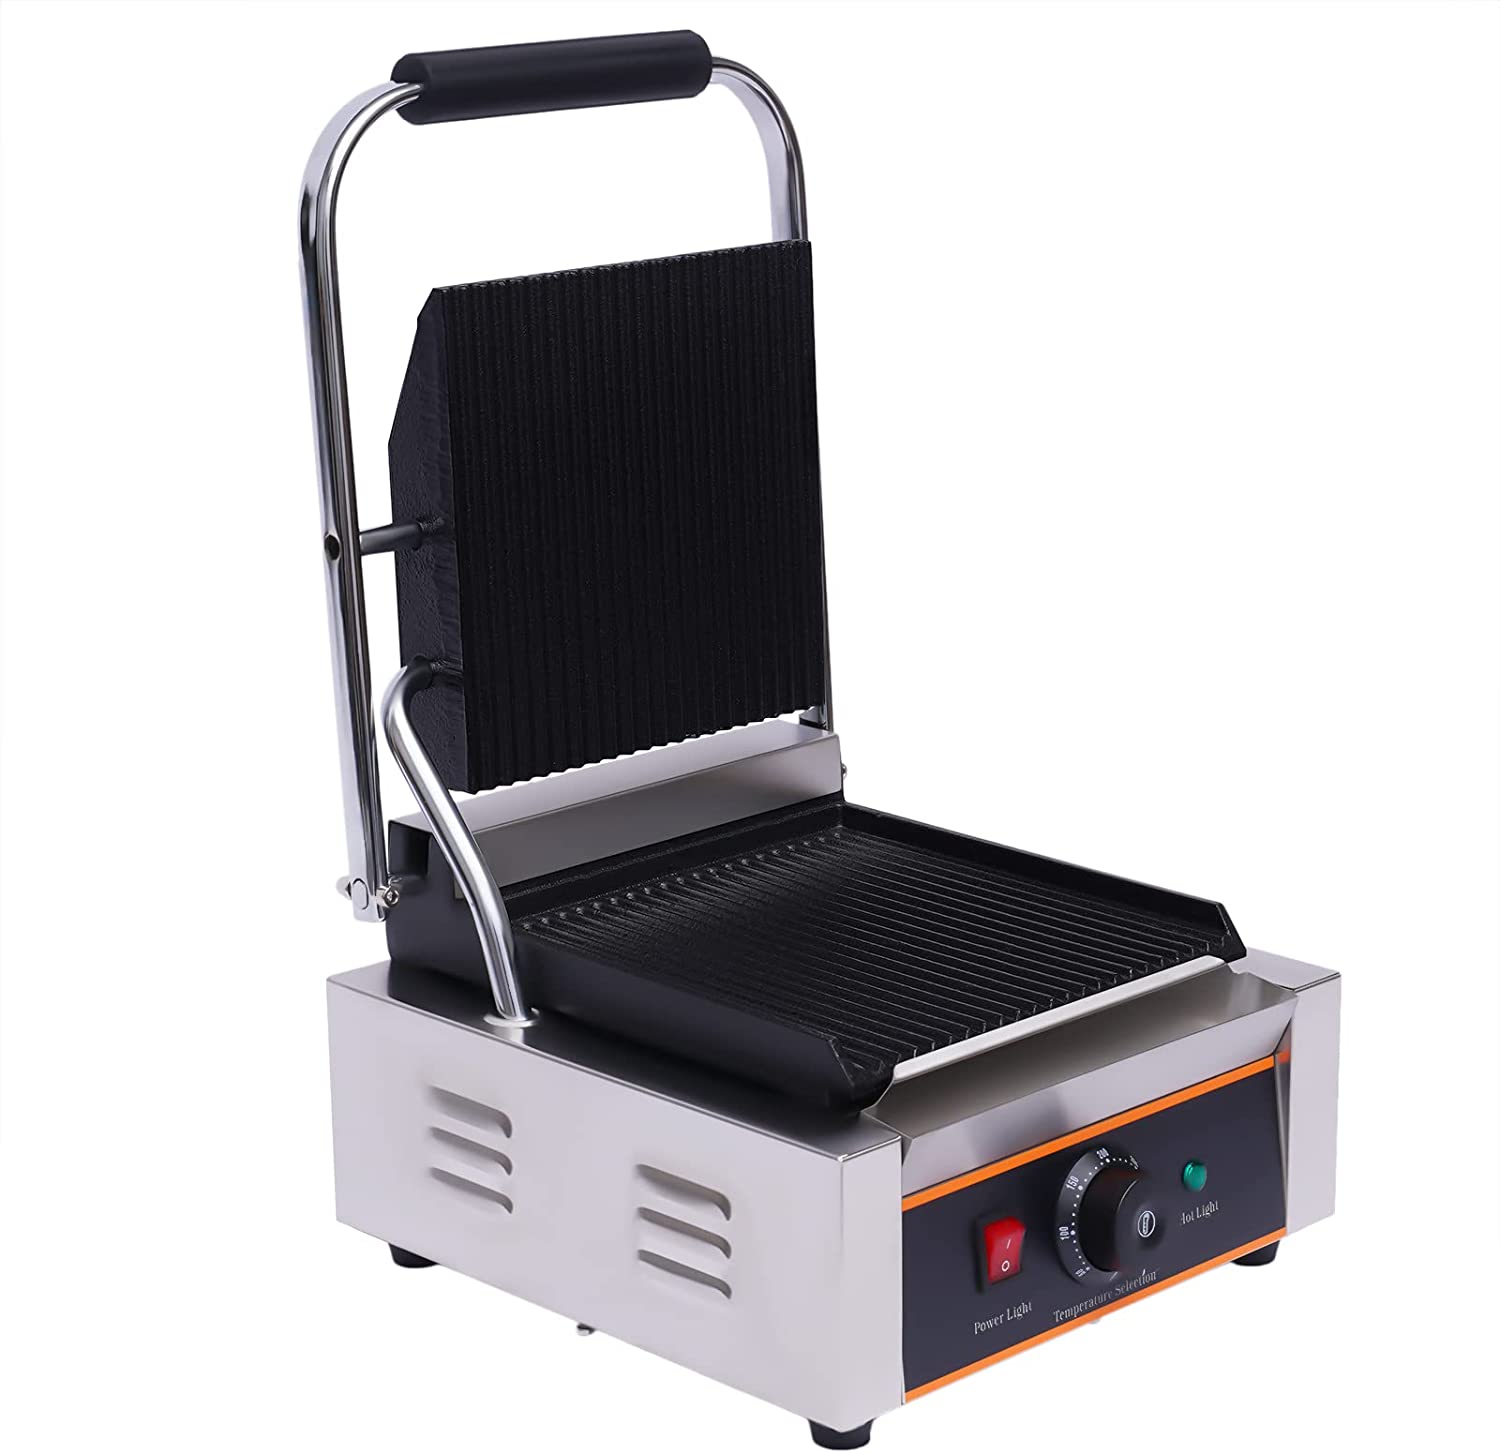 Electric Contact Grill, Sandwich Maker, Table Grill, Electric Grill Plate, Panini Toasts, Steak, 1800 W